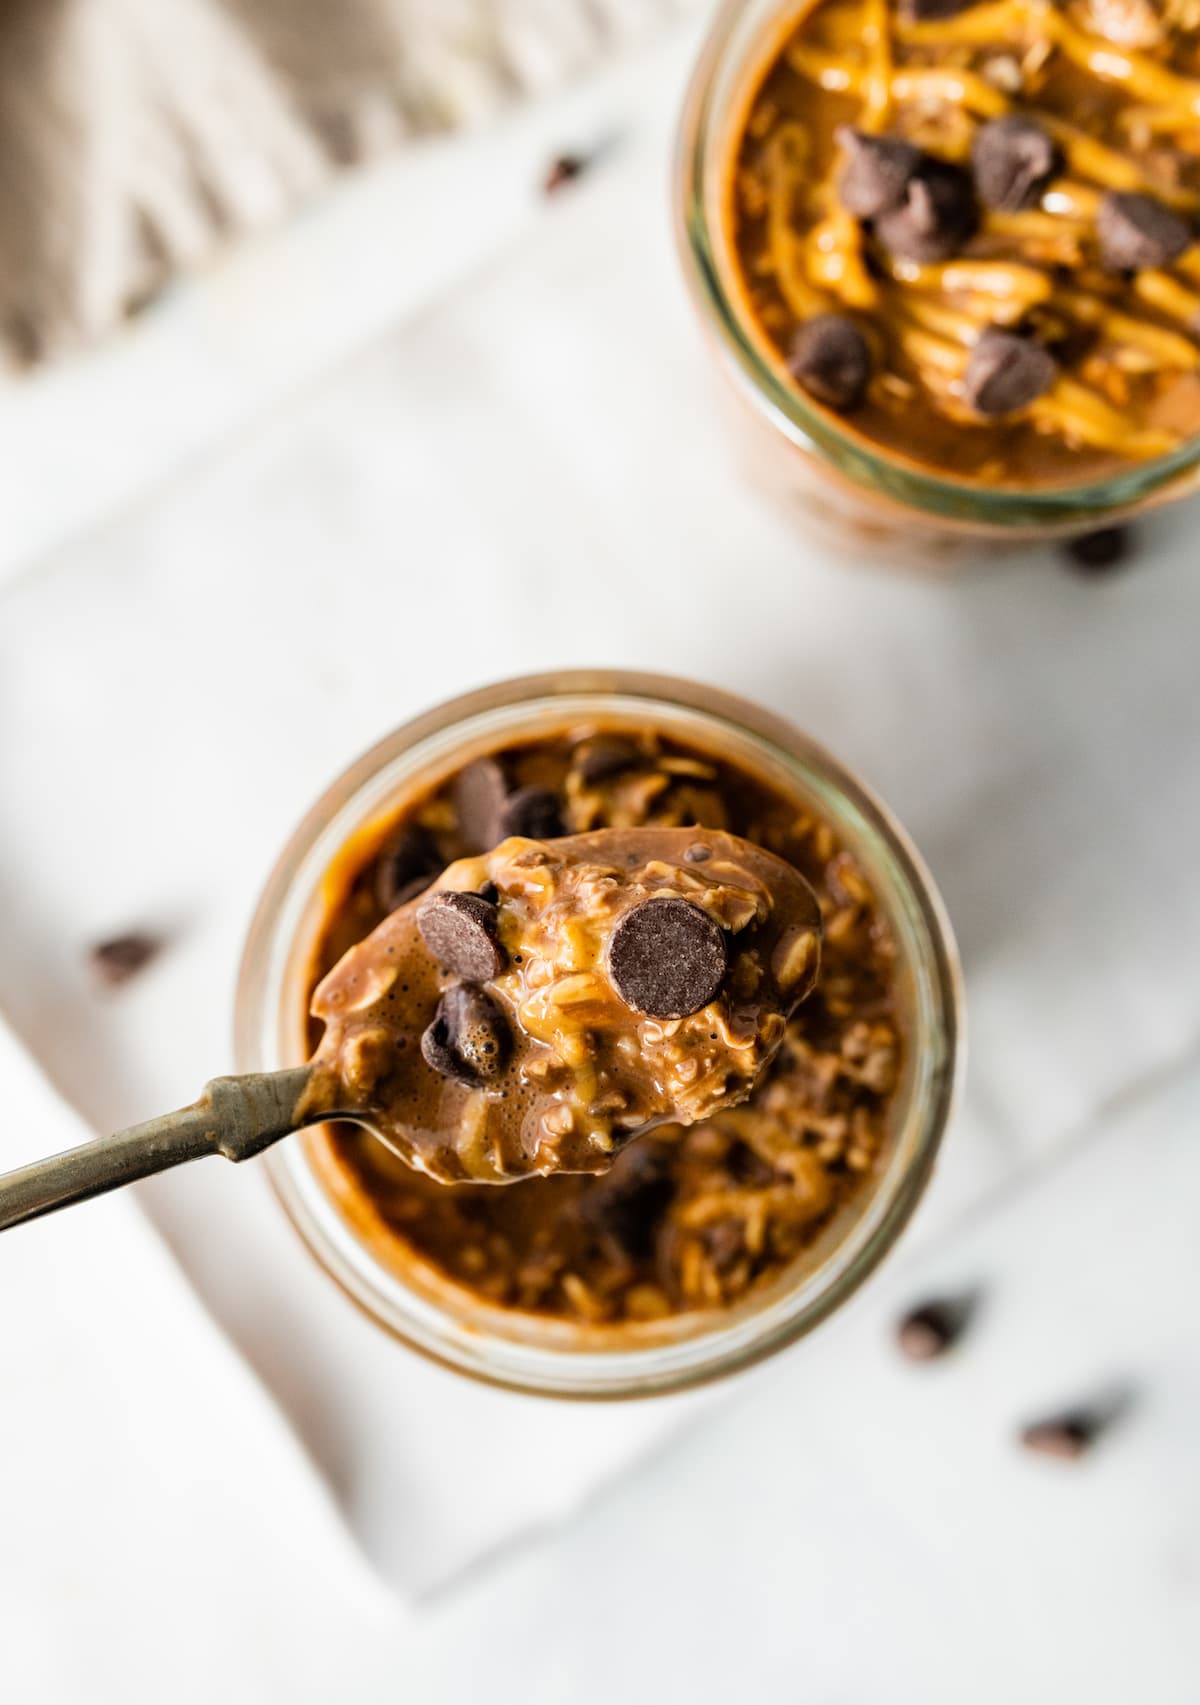 A spoonful of the chocolate overnight oats topped with chocolate chips.